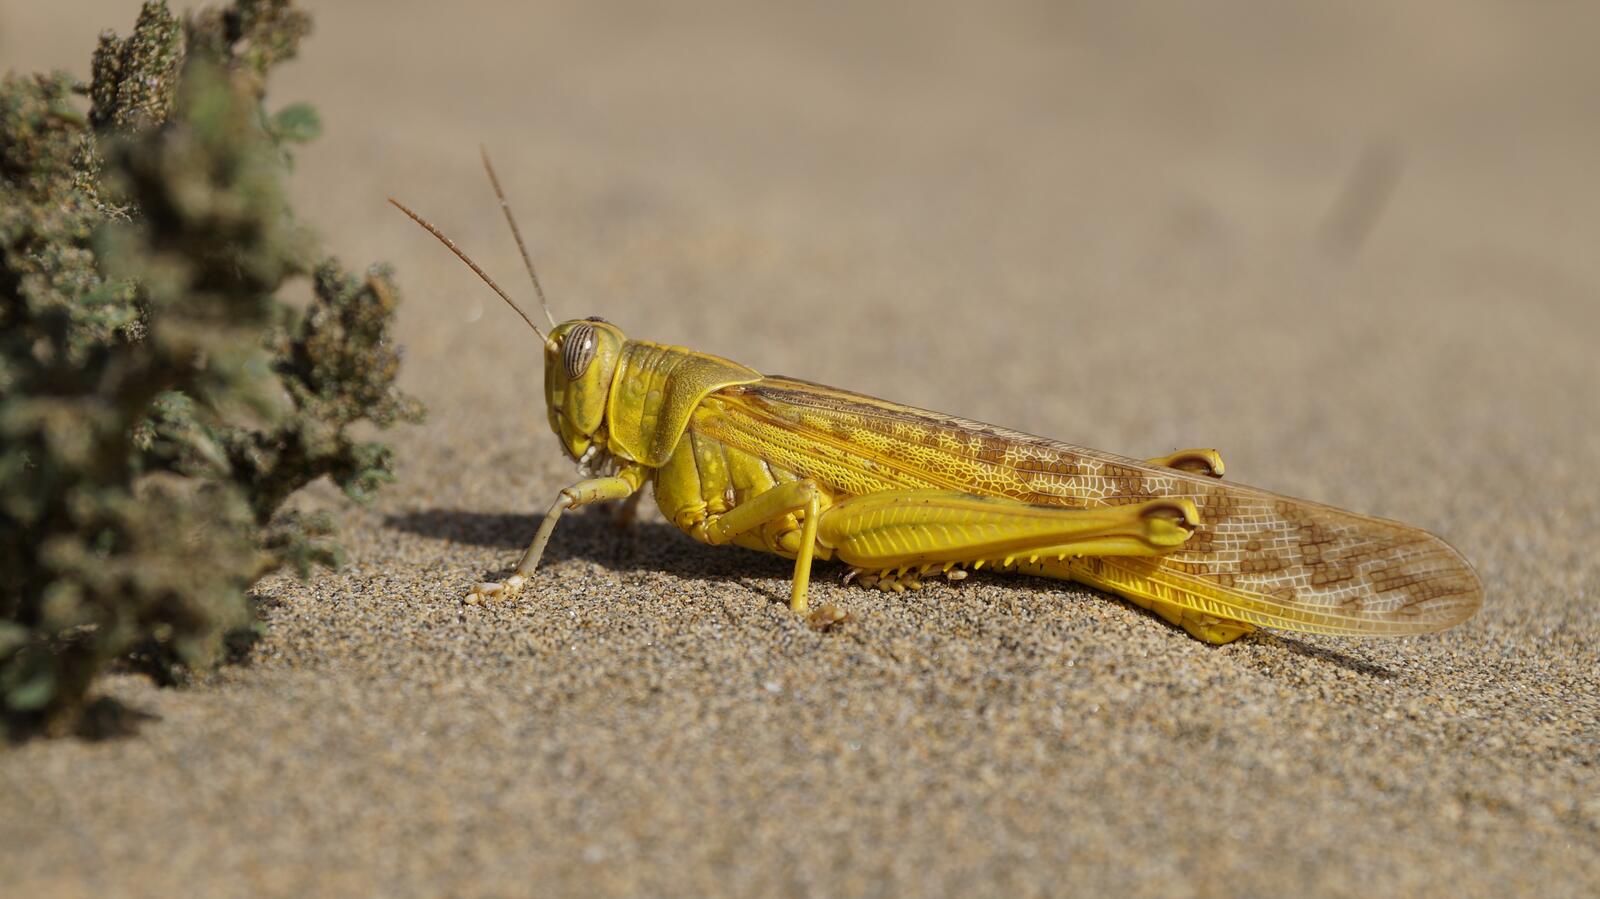 Wallpapers grasshopper insects wallpaper locust on the desktop